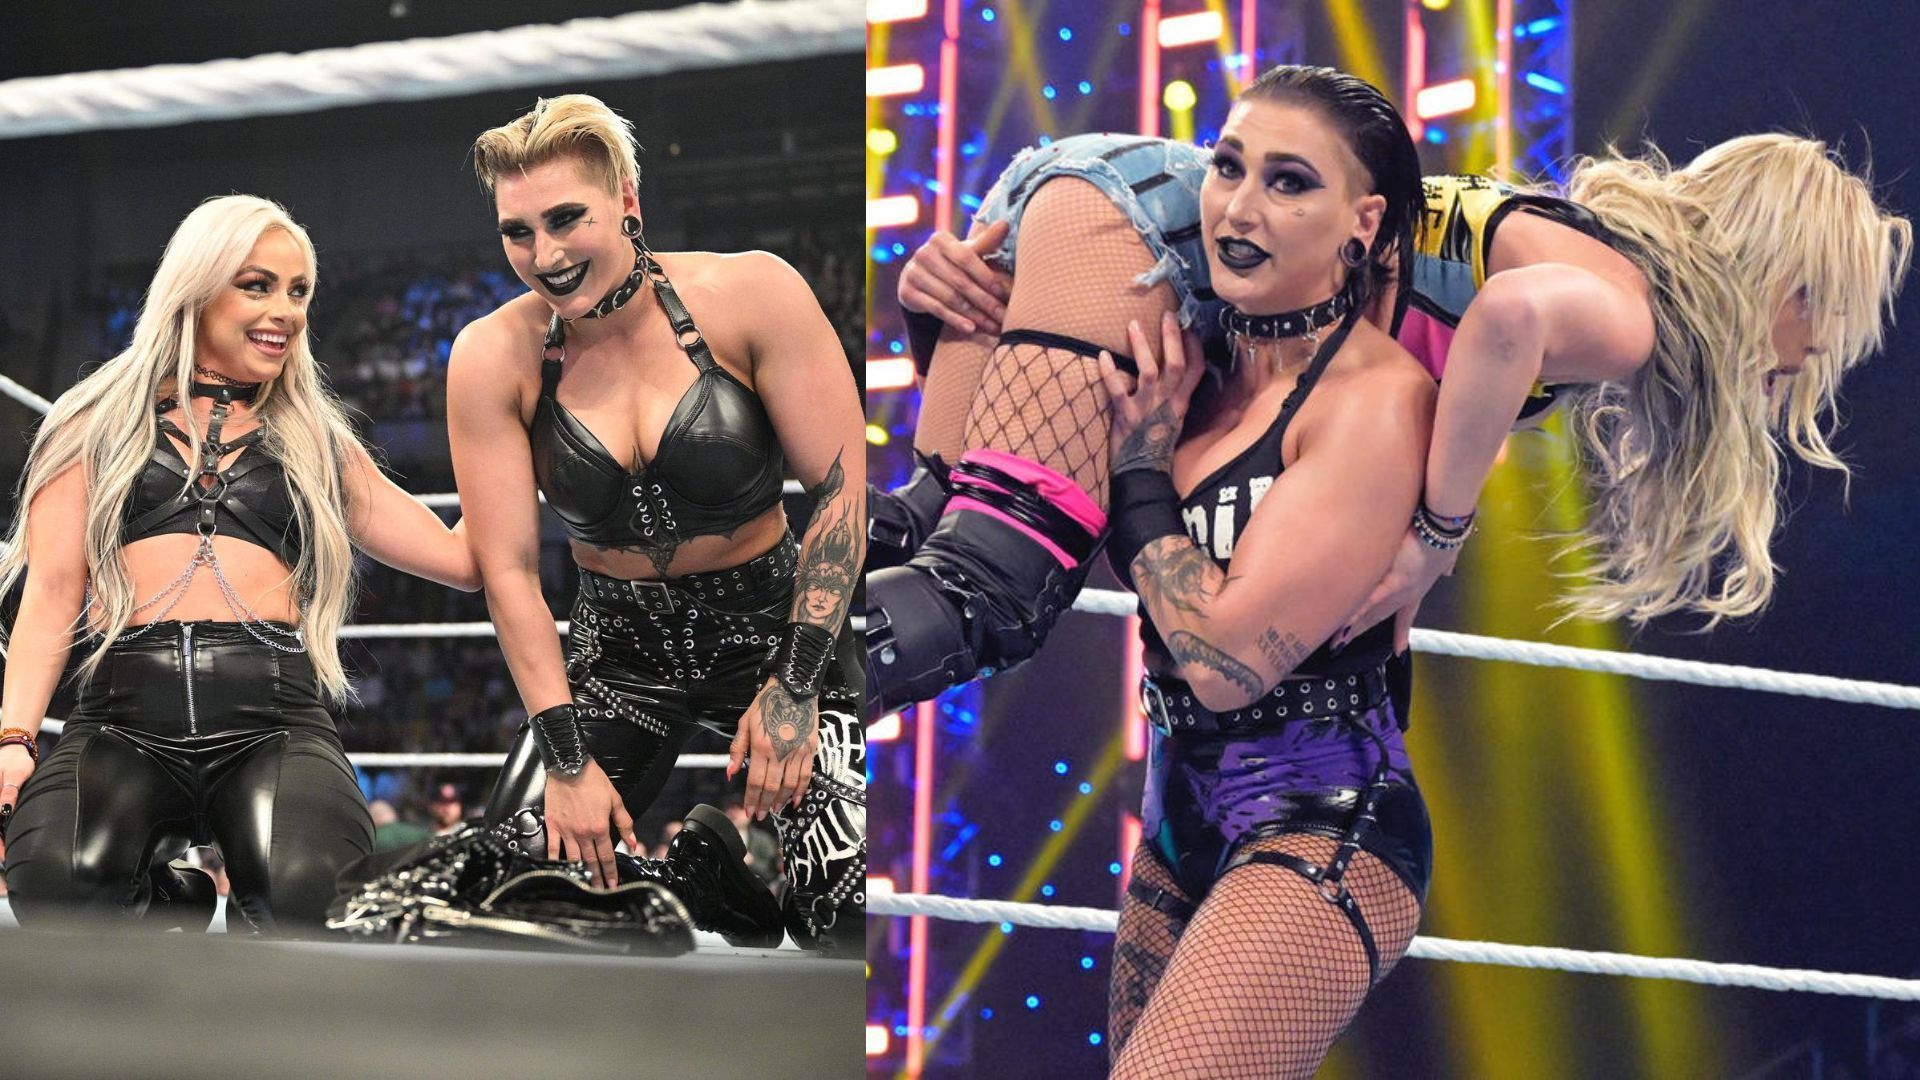 Rhea Ripley and Liv Morgan were tag team partners in early 2022